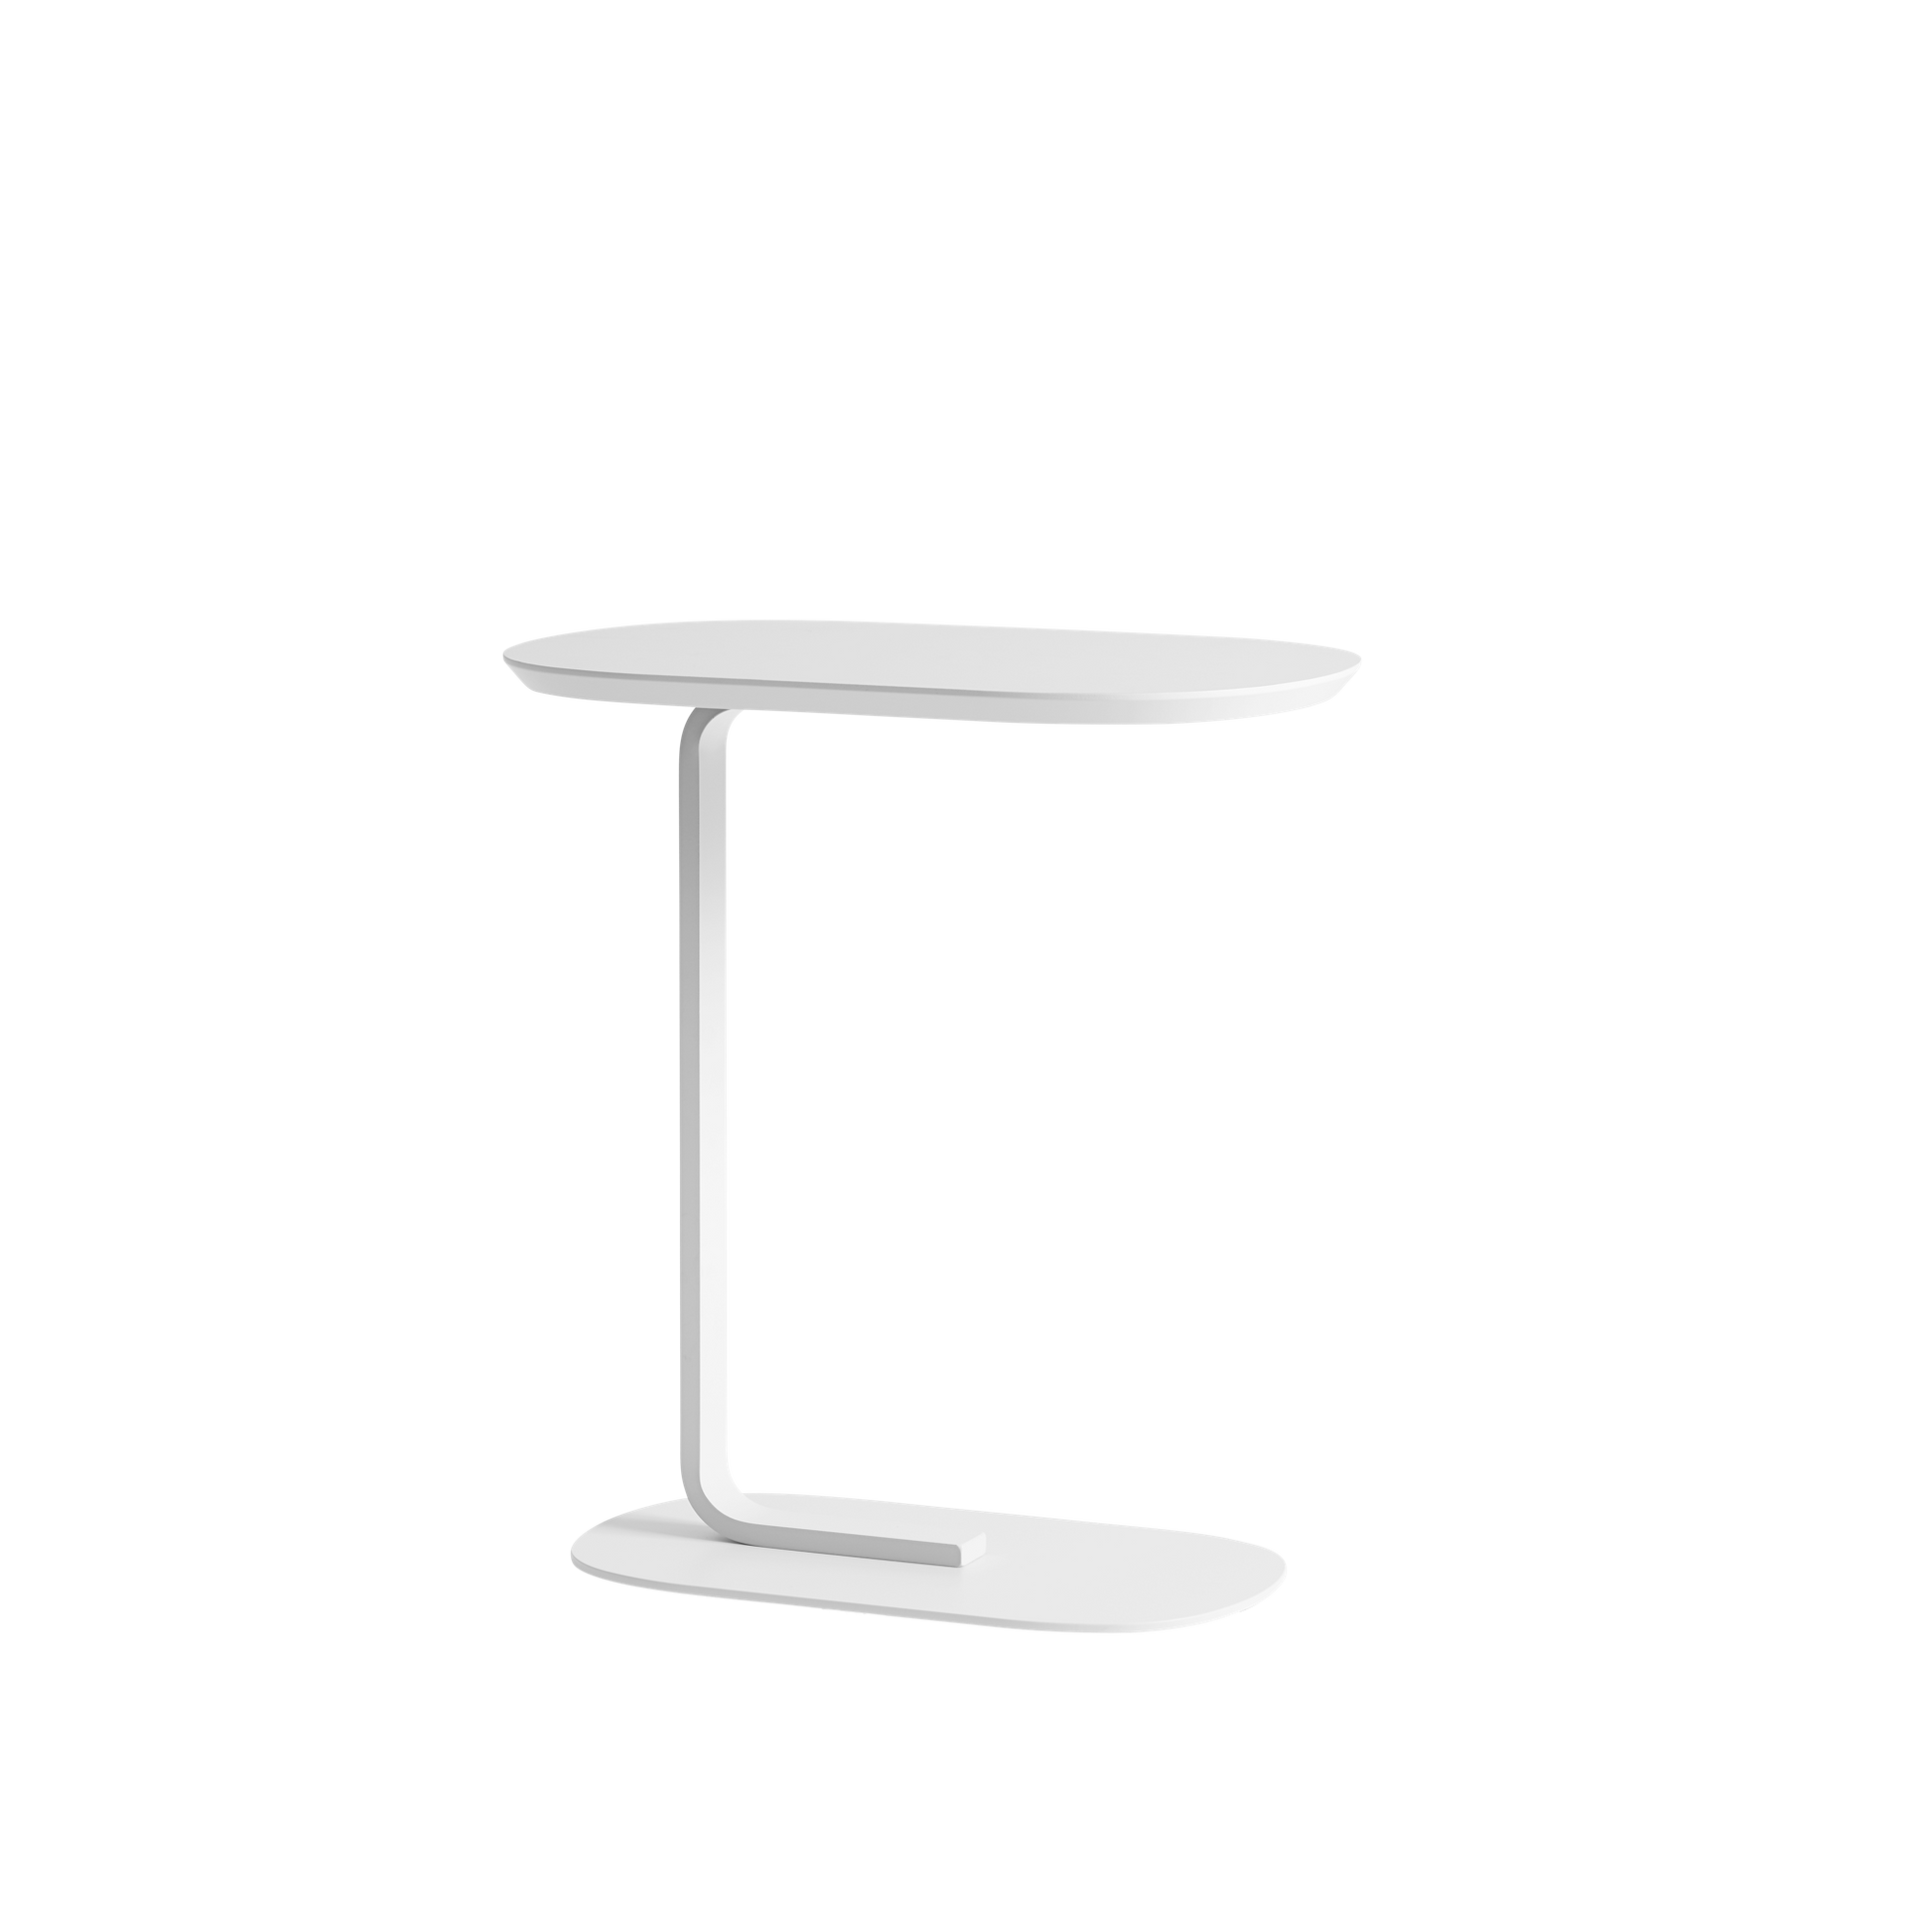 Relate Coffee Table 60.5 cm by Muuto #Off-white